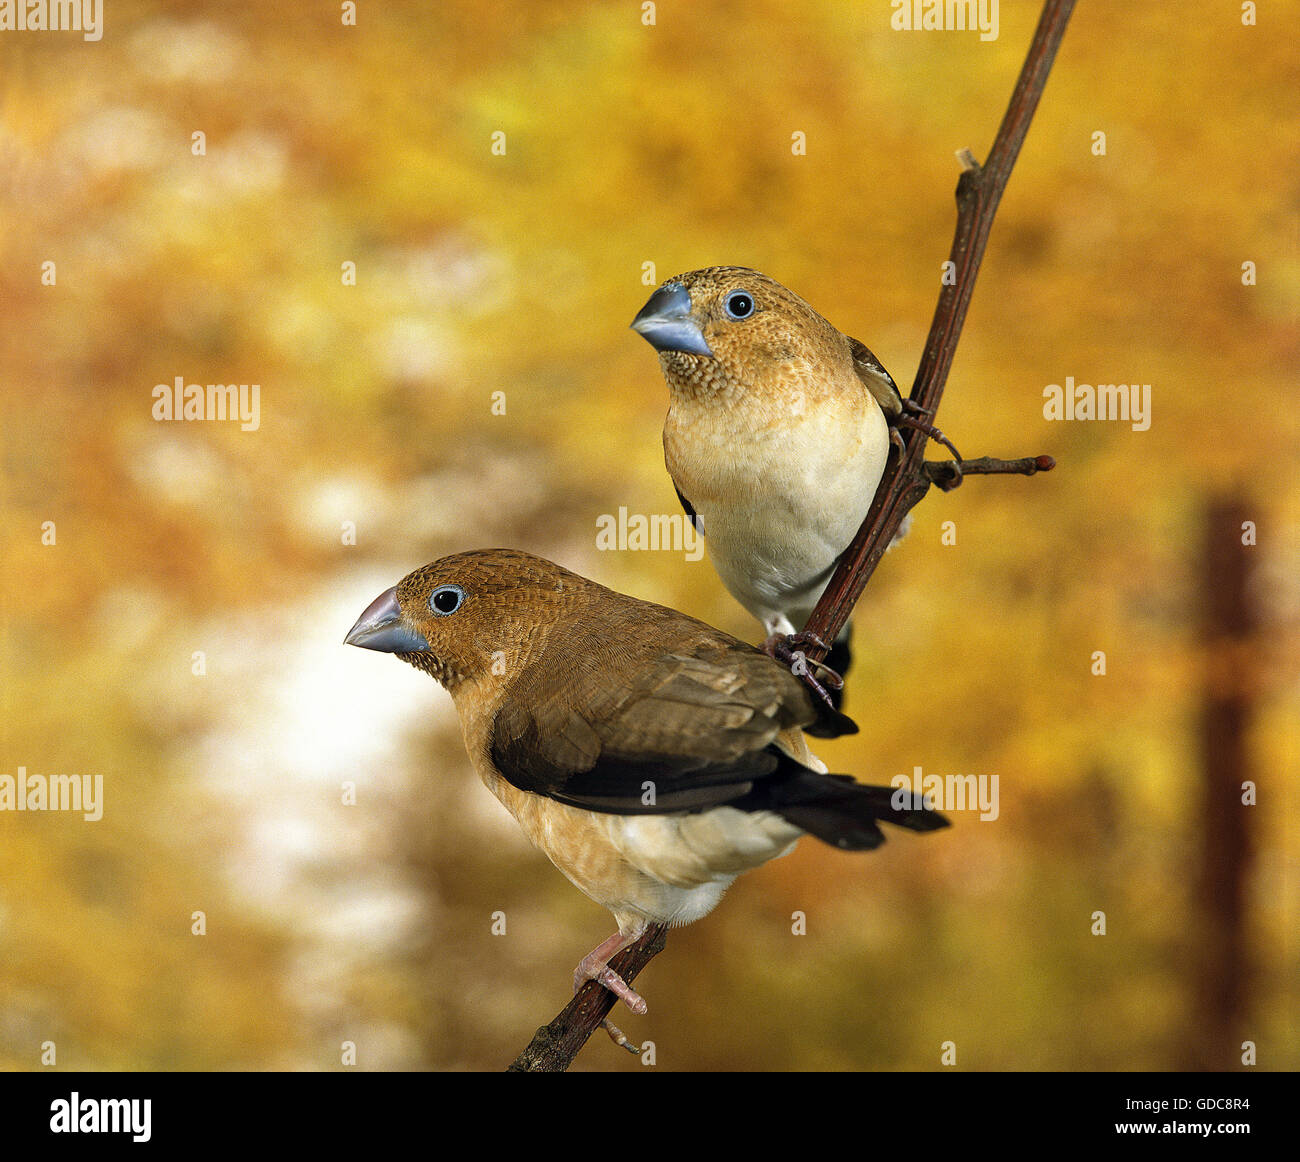 AFRICAN SILVERBILL lonchura cantans, PAIR ON BRANCH Stock Photo